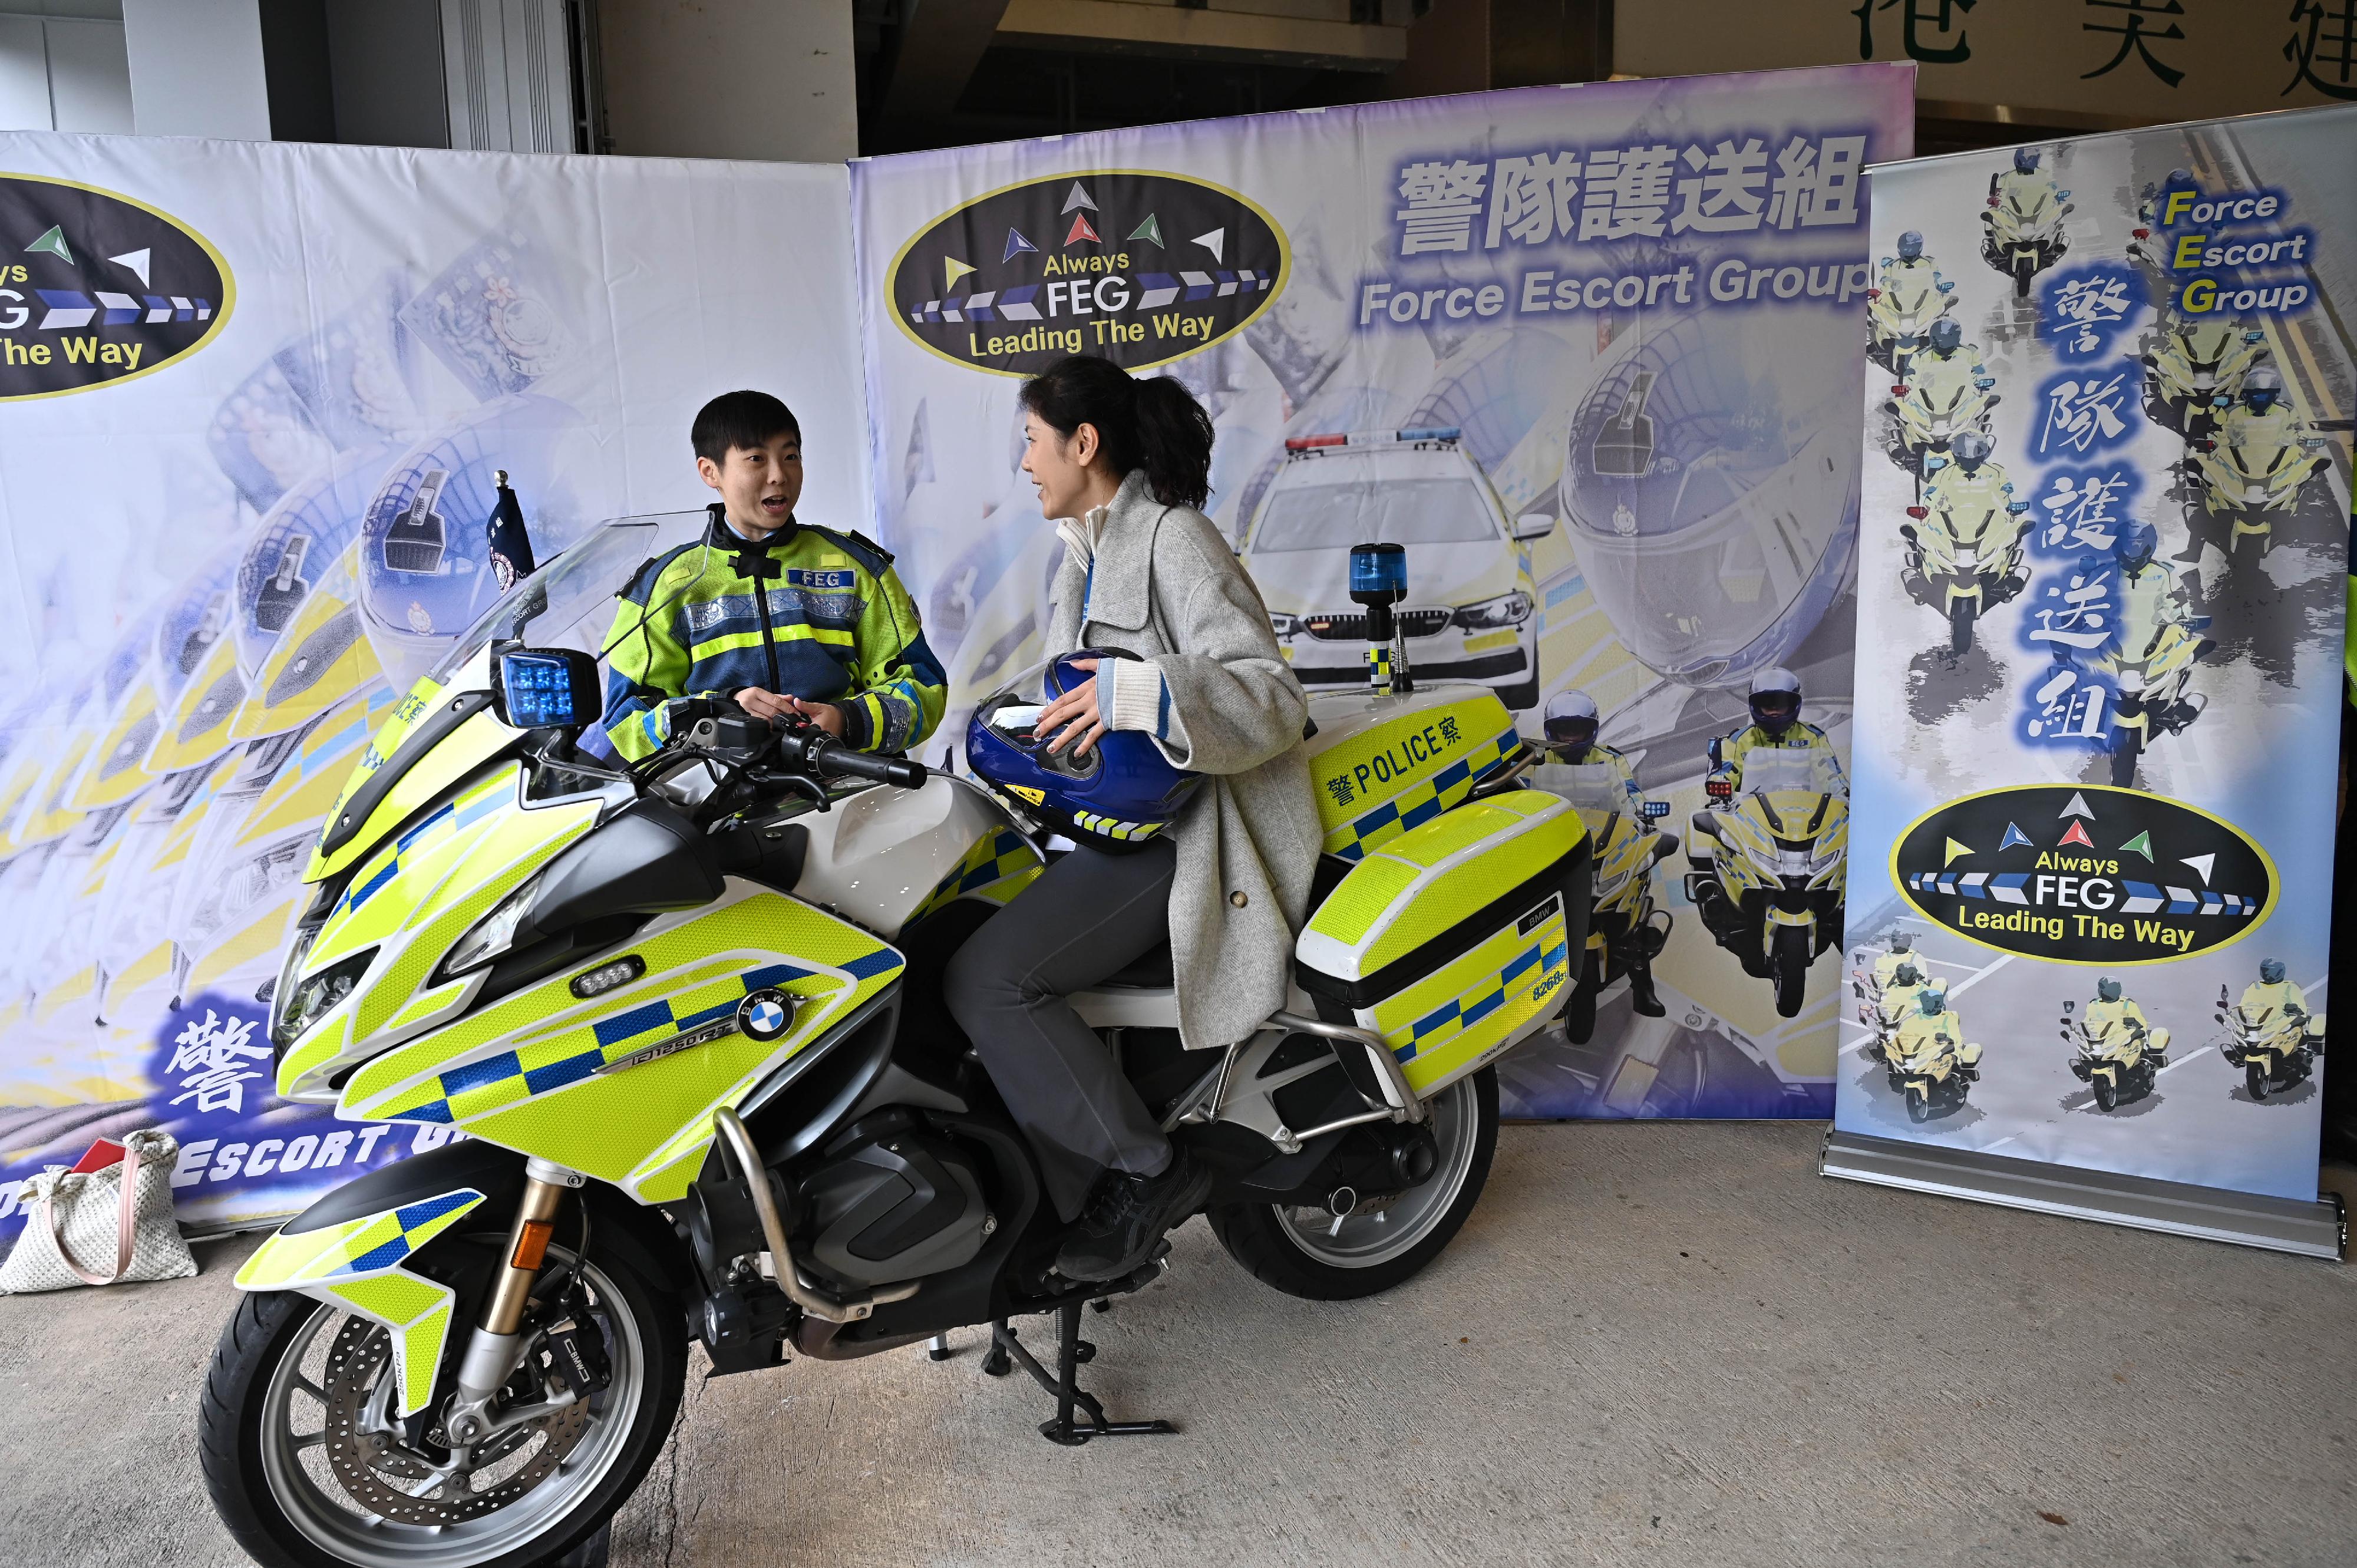 The Hong Kong Police Force today (December 17) held the Police Recruitment Experience and Assessment Day at the Hong Kong Police College. Photo shows an officer from the Force Escort Group introducing their work and equipment to a participant.